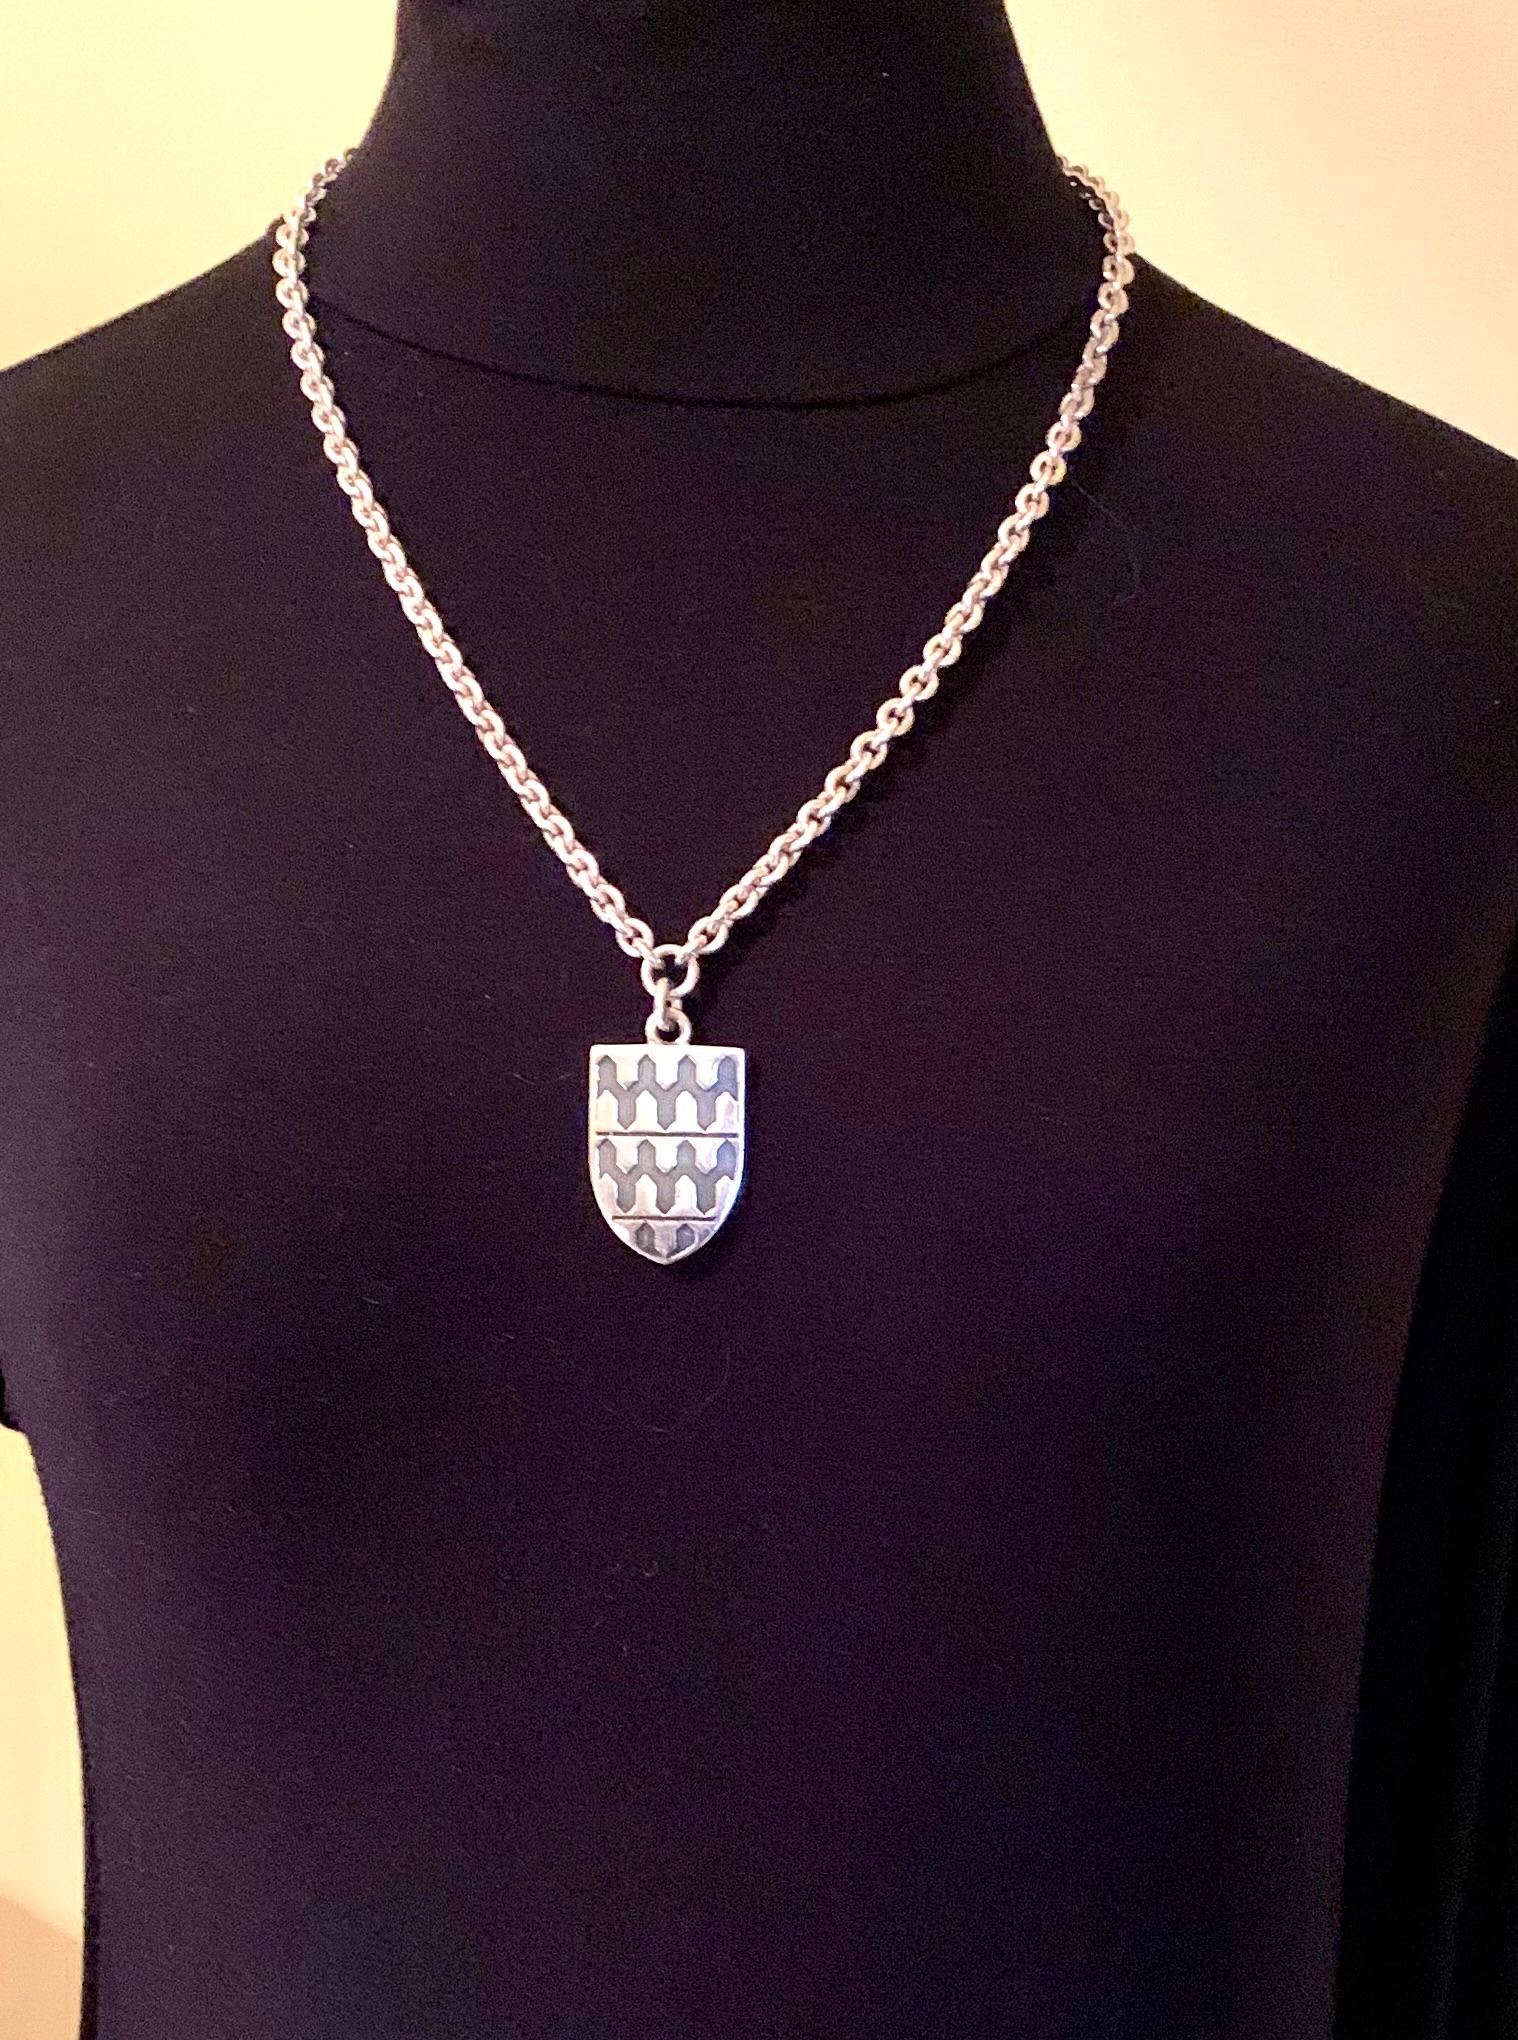 Rare estate Garrard substantial stering silver Georgian style armoreal shield pendant necklace 
Provenance: from the estate of a notable New York City psychiatrist and collector of unusual, often one of a kind jewels
Garrard has represented the very